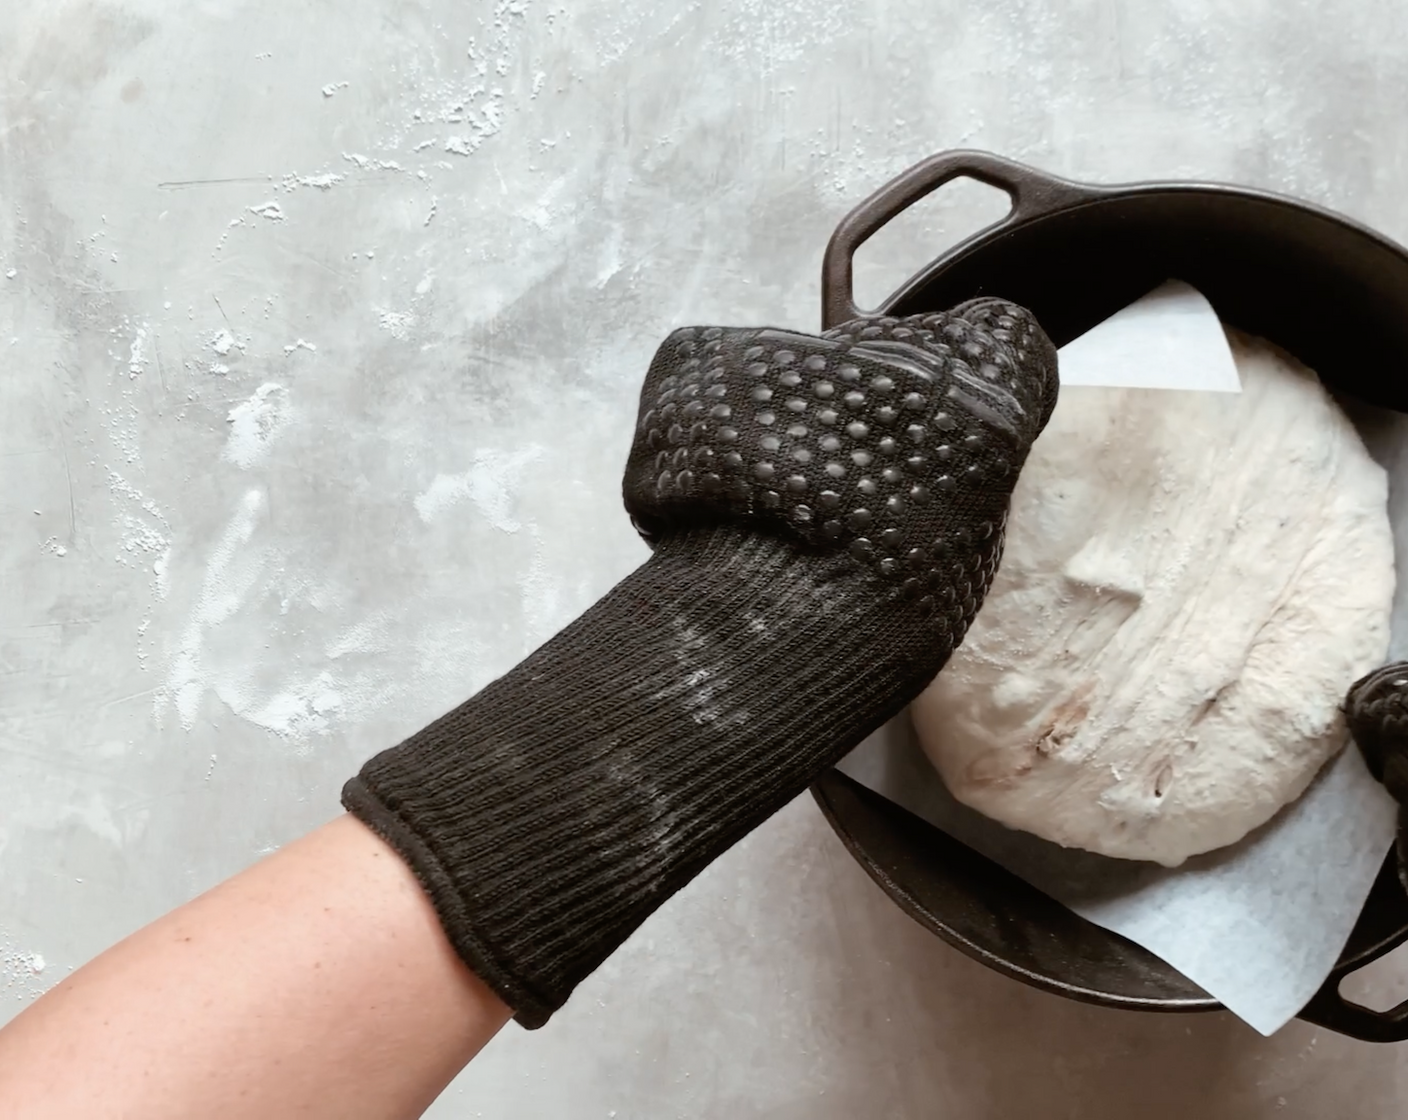 step 11 Use oven-proof gloves/mitts to carefully remove the pre-heated Dutch oven from the oven, and place it on a trivet or on your stovetop. Remove the lid, pick up the parchment paper with the dough on it, and carefully place it in the dutch oven. Put the lid back on and bake, covered for 25 minutes.